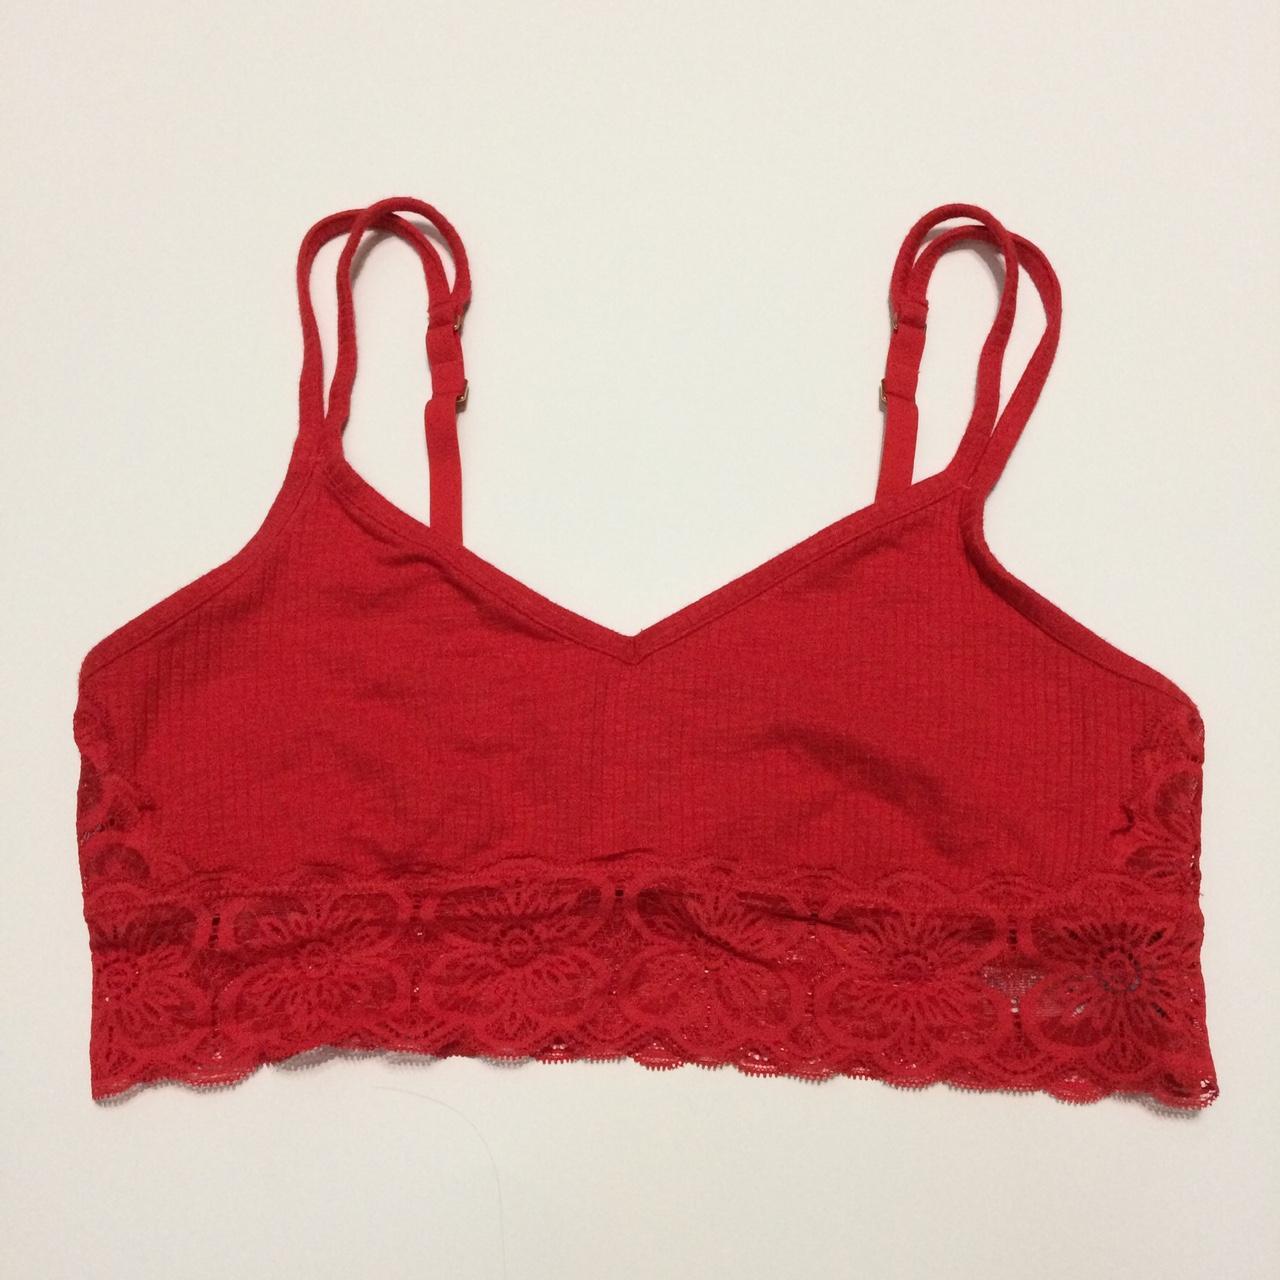 Aerie Rib Knit With Lace Bralette, Brand: Aerie, - Depop